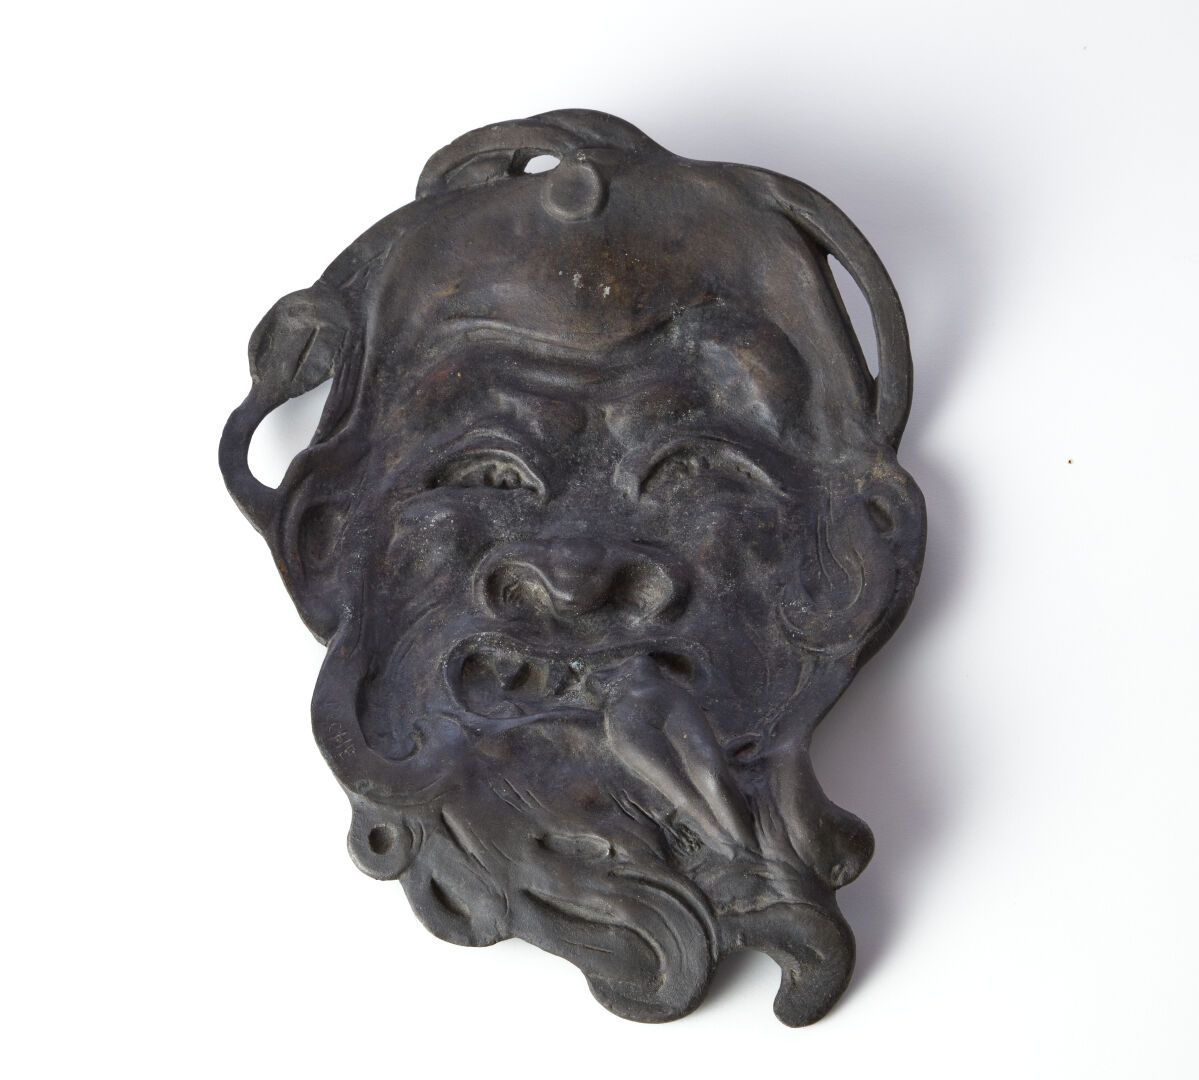 Null FISHING
Mask of a satyr swallowing a bather
Bronze with patina
26,5 x 20 cm